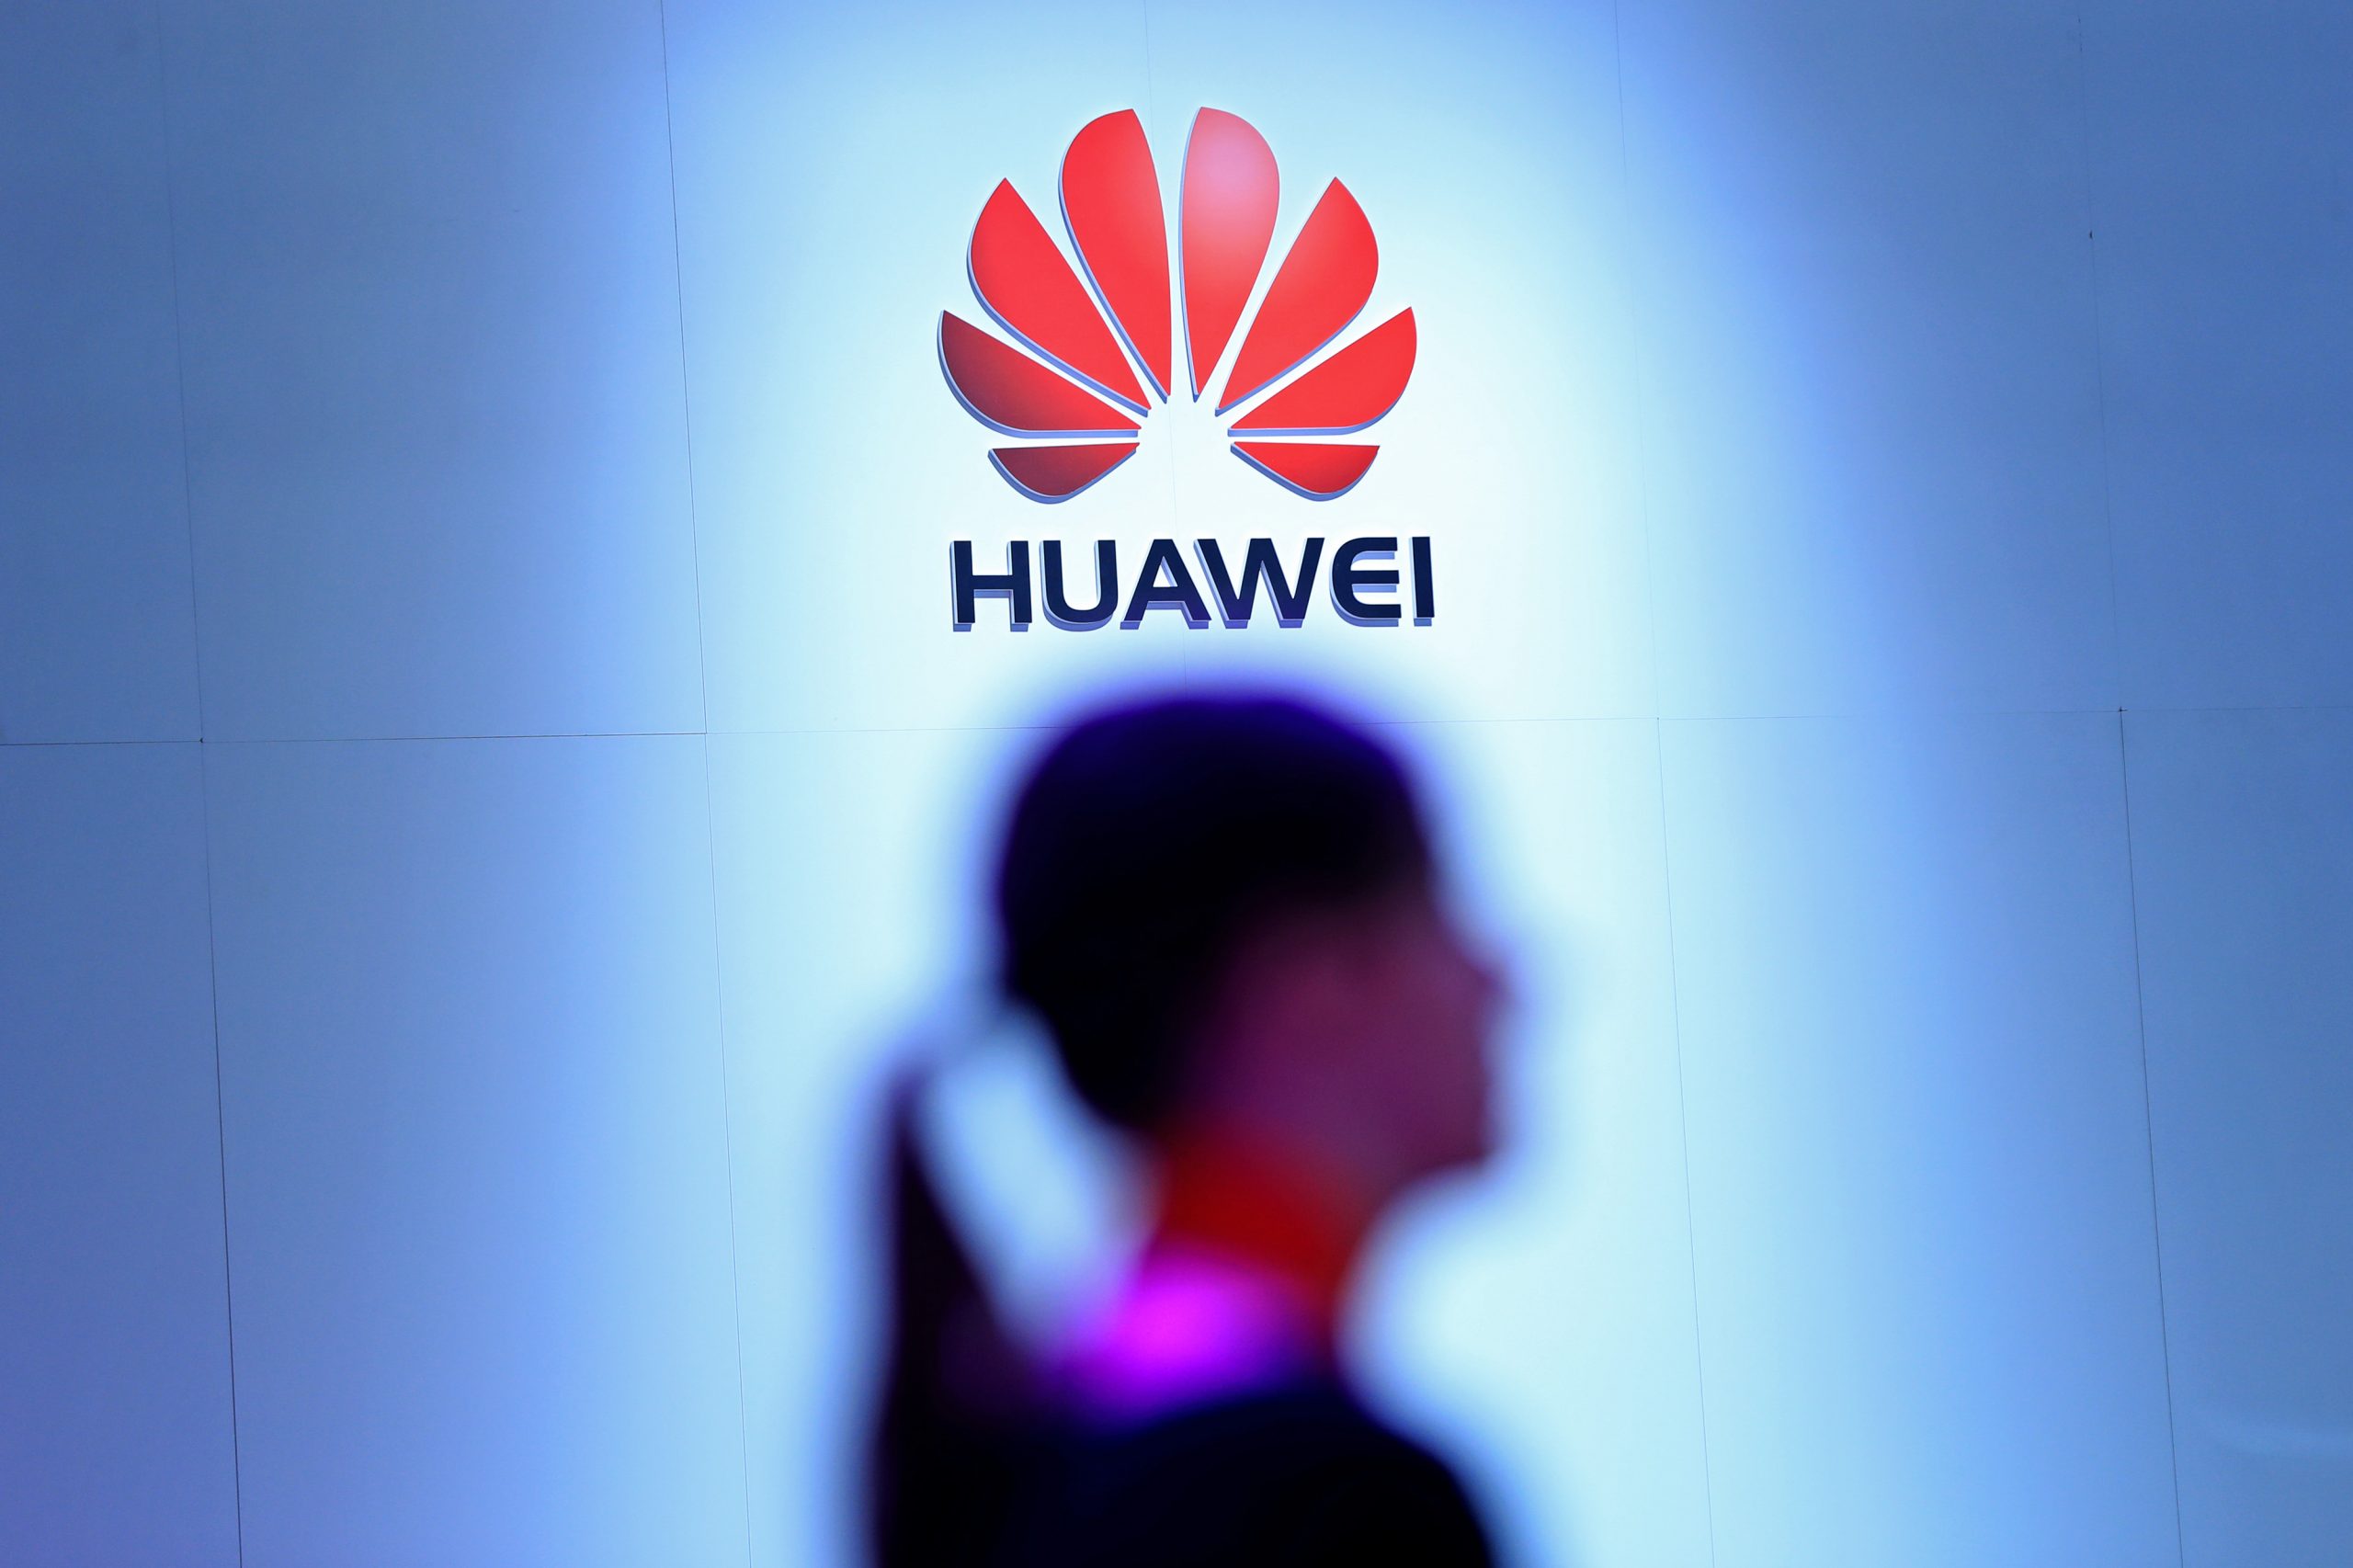 Huawei ban could lead to phones not working for days: UK Carriers